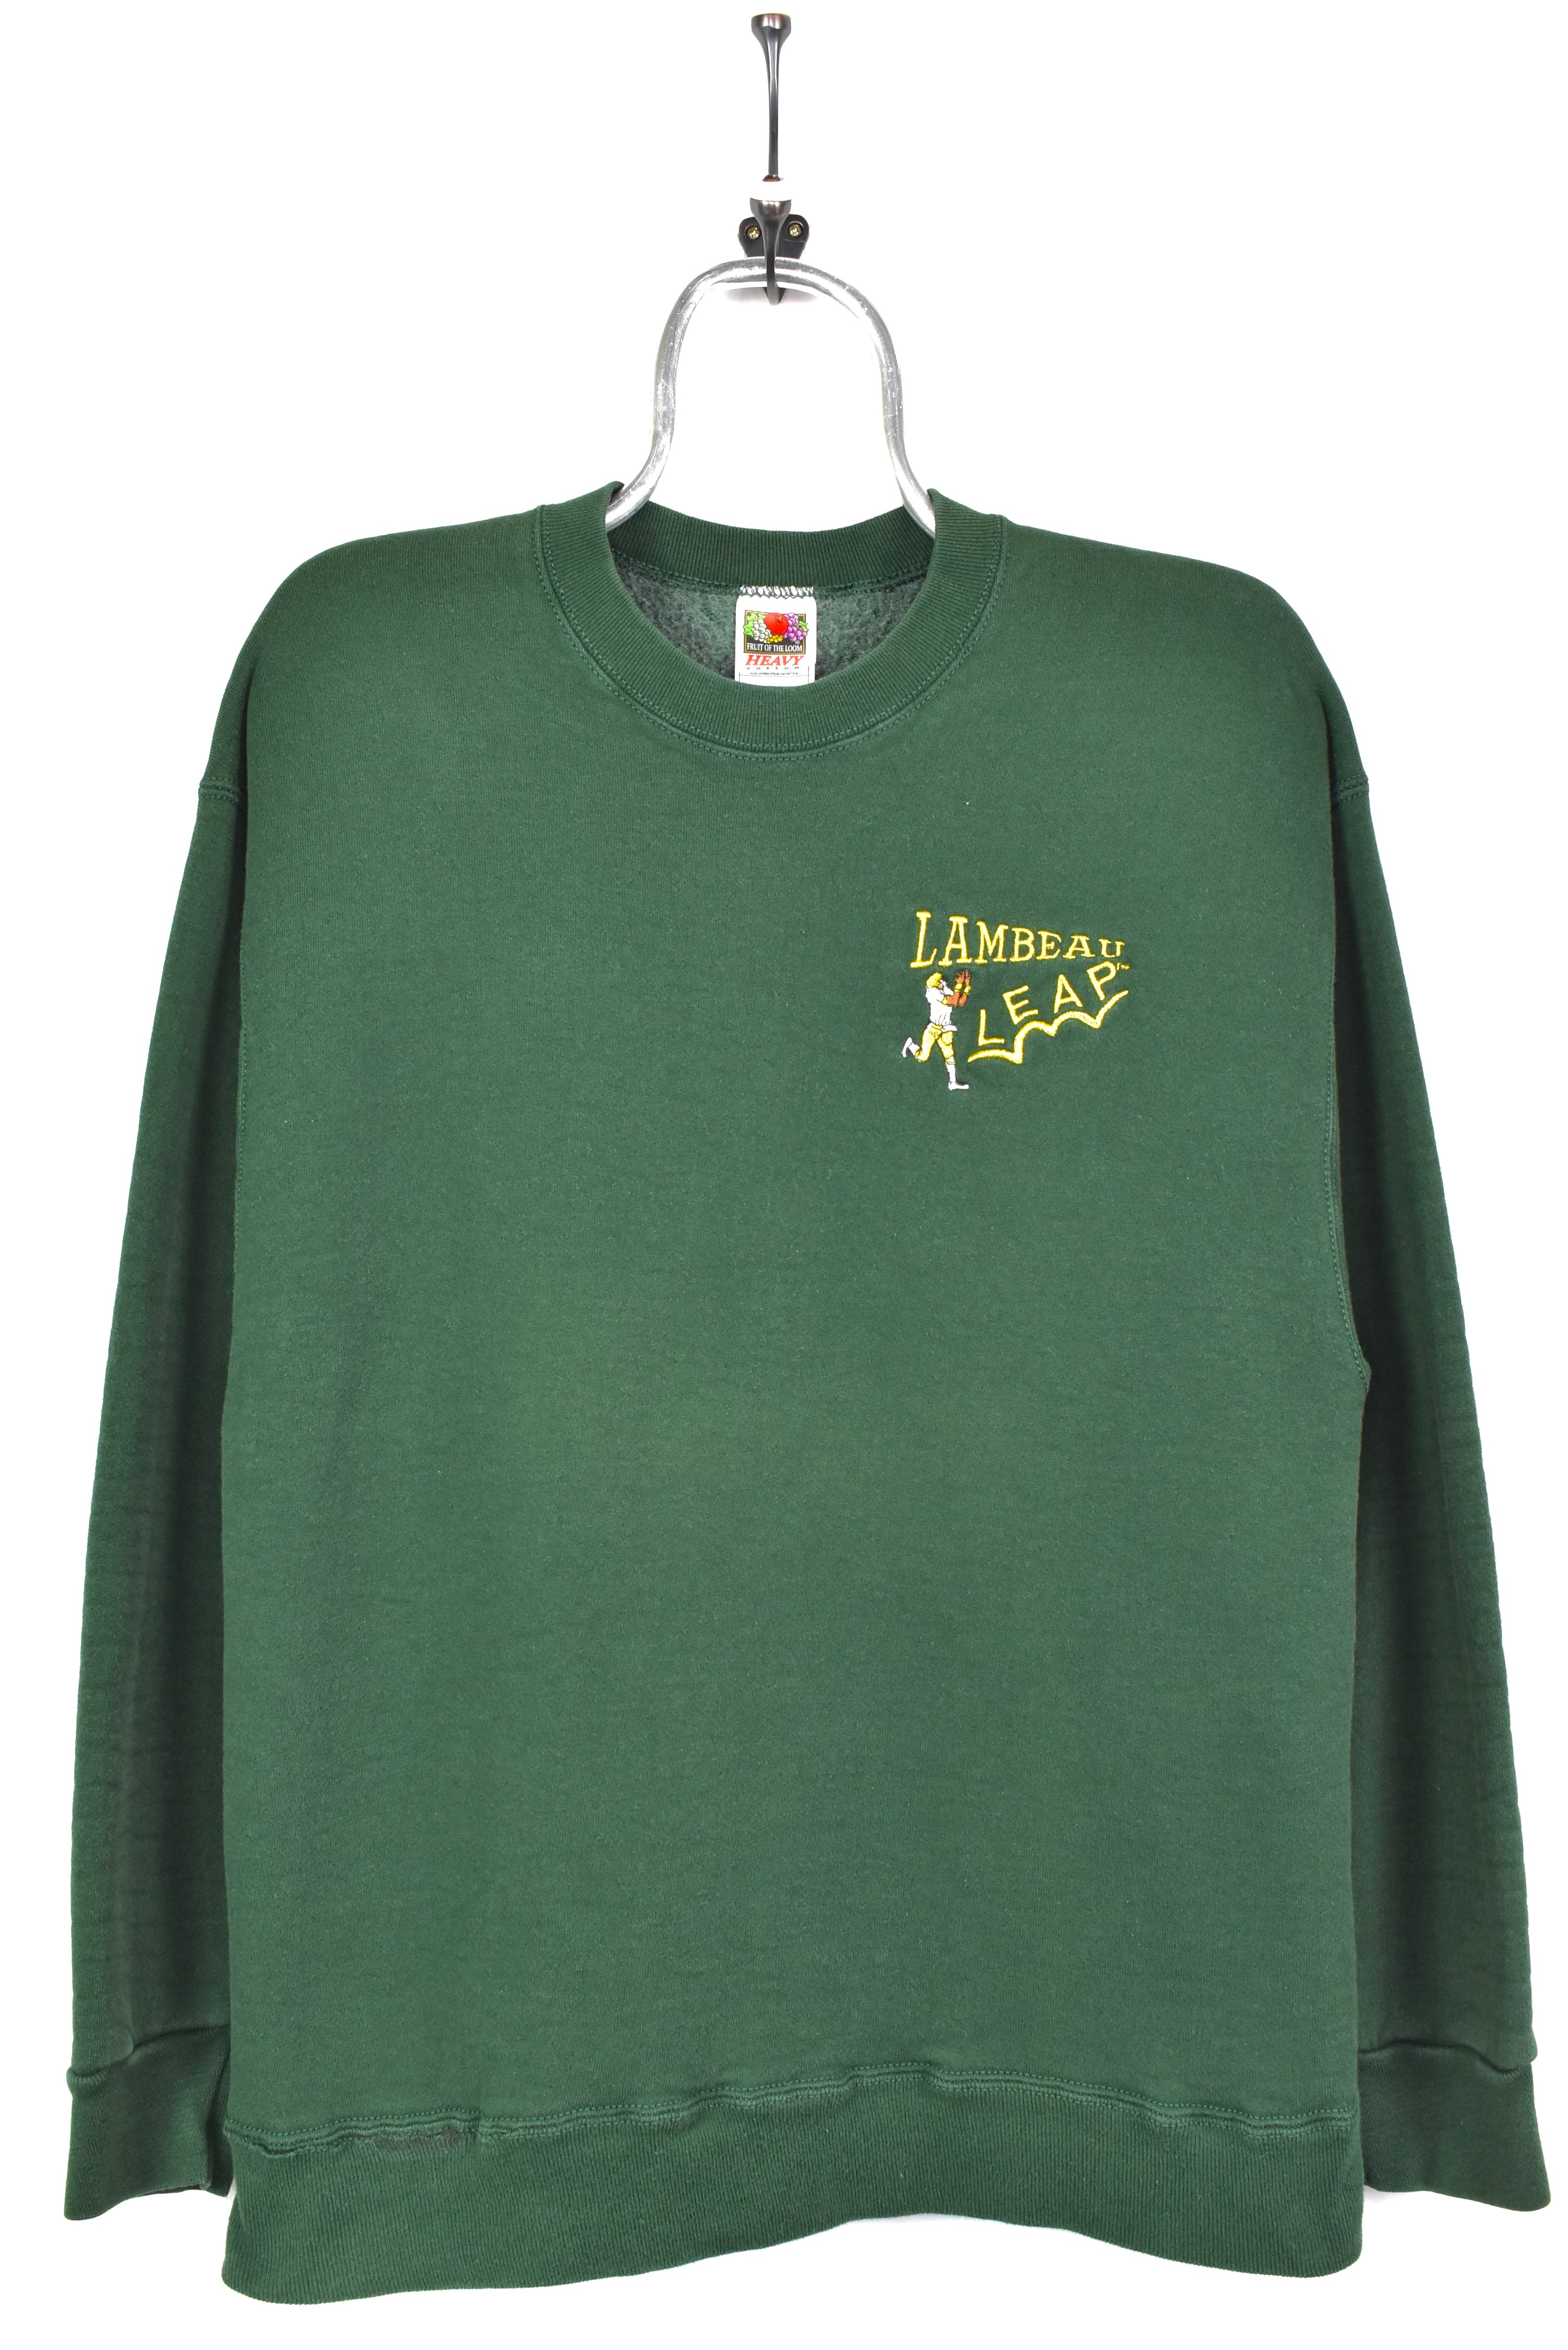 VINTAGE NFL GREEN BAY PACKERS EMBROIDERED GREEN SWEATSHIRT | LARGE PRO SPORT